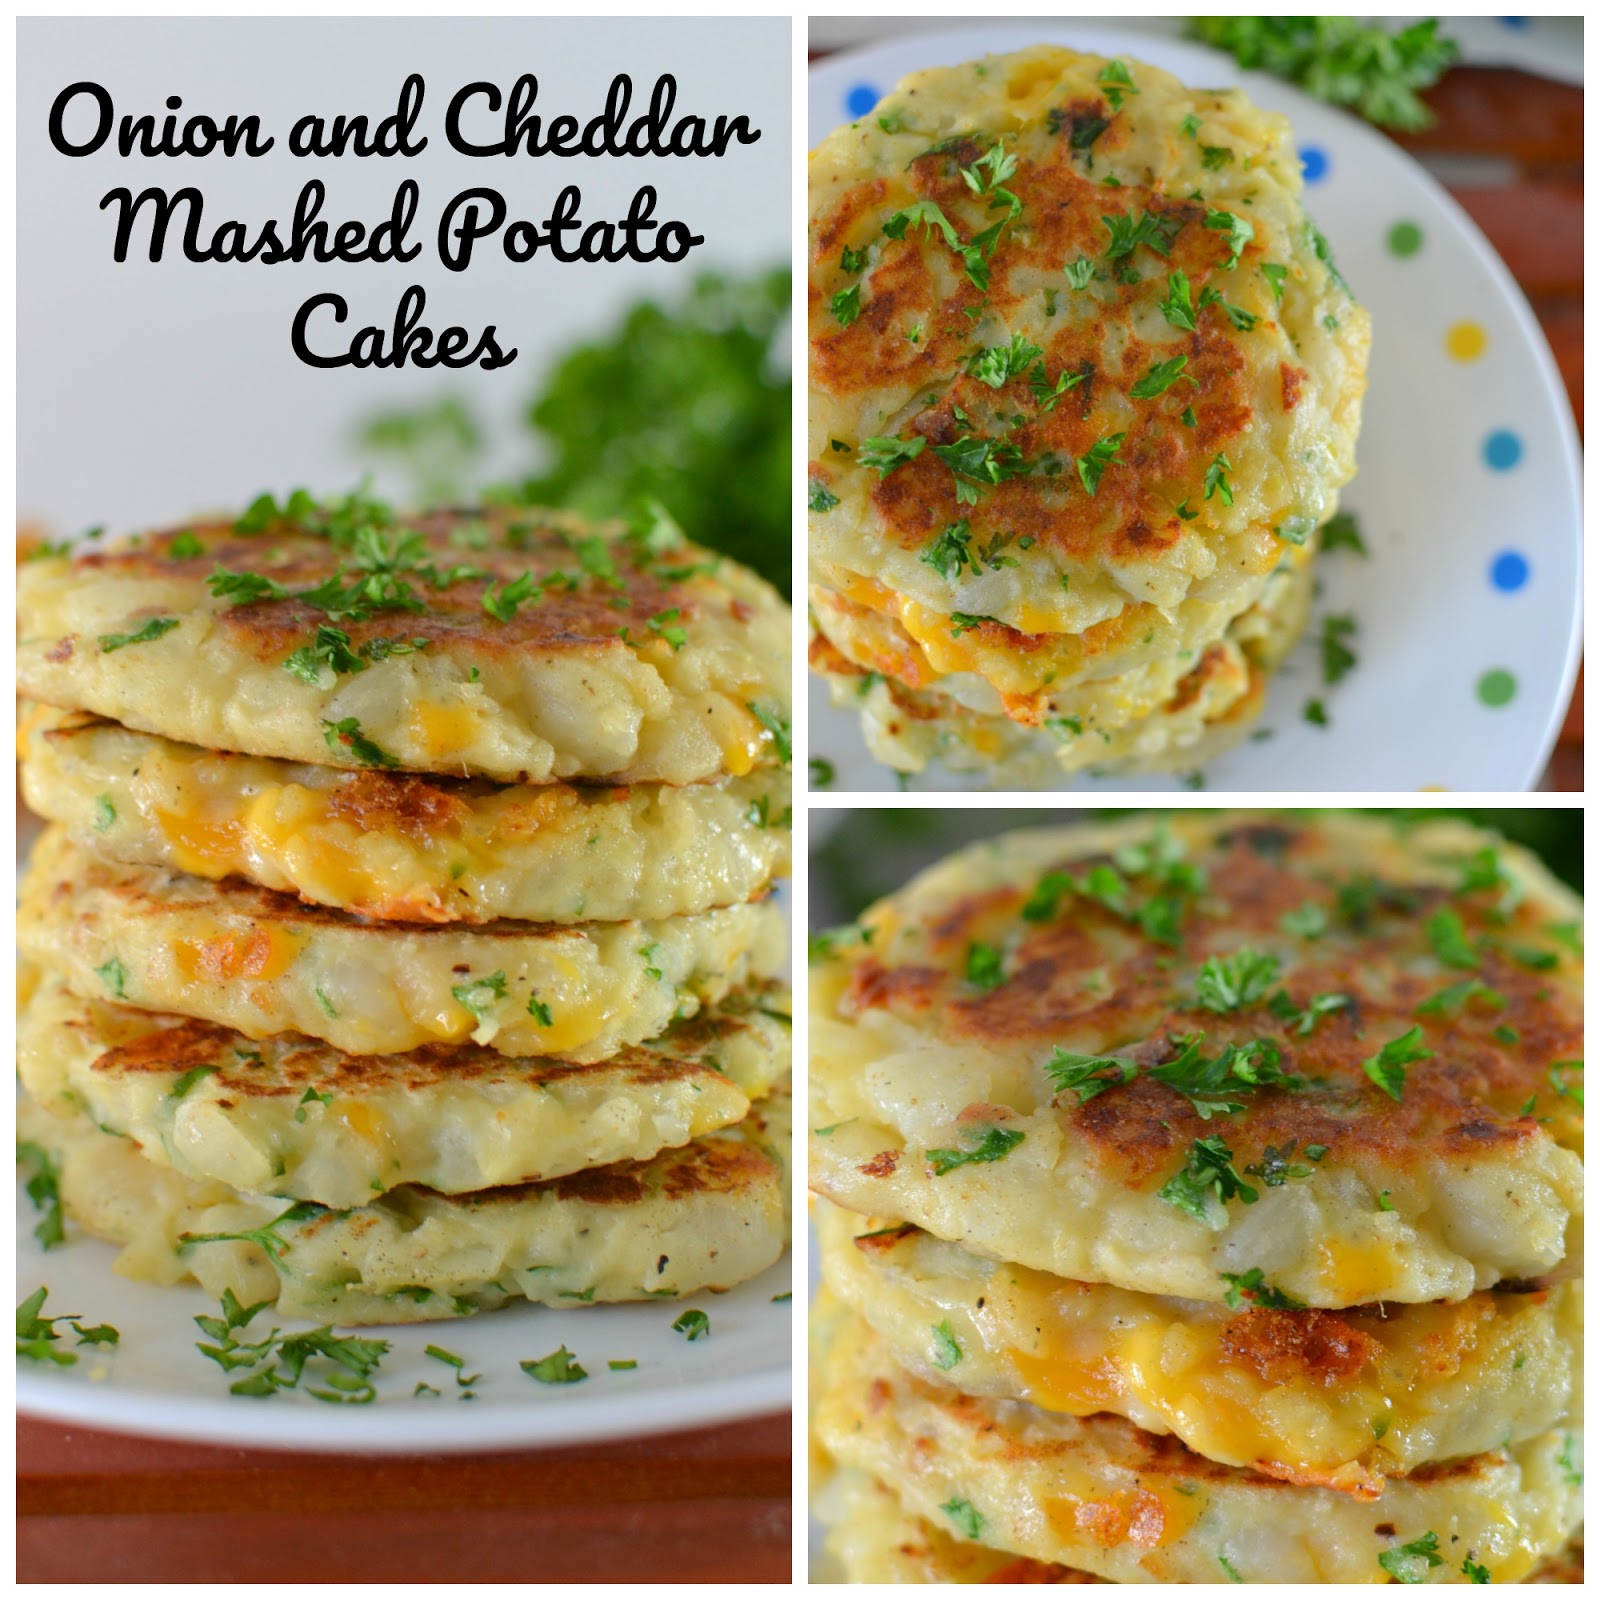 This is one of the best recipes to use leftover mashed potatoes, especially after the holidays! A mixture of fresh herbs, garlic and some cheesy goodness makes this potato pancake perfection!